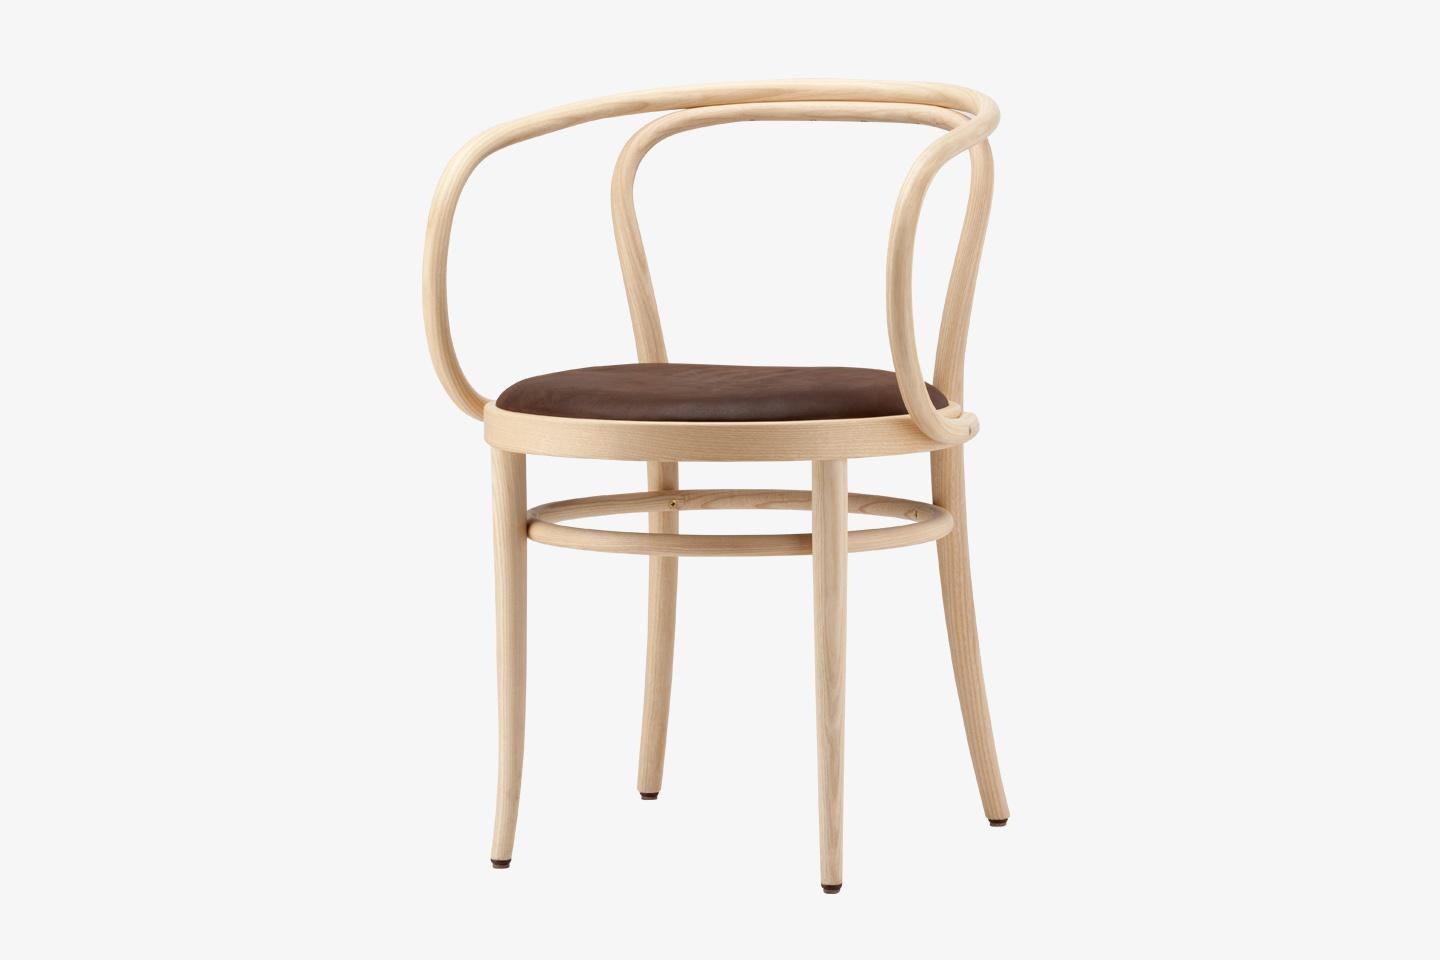 Contemporary Customizable 210 R Bentwood Chair by Gebrüder T, 1819 For Sale